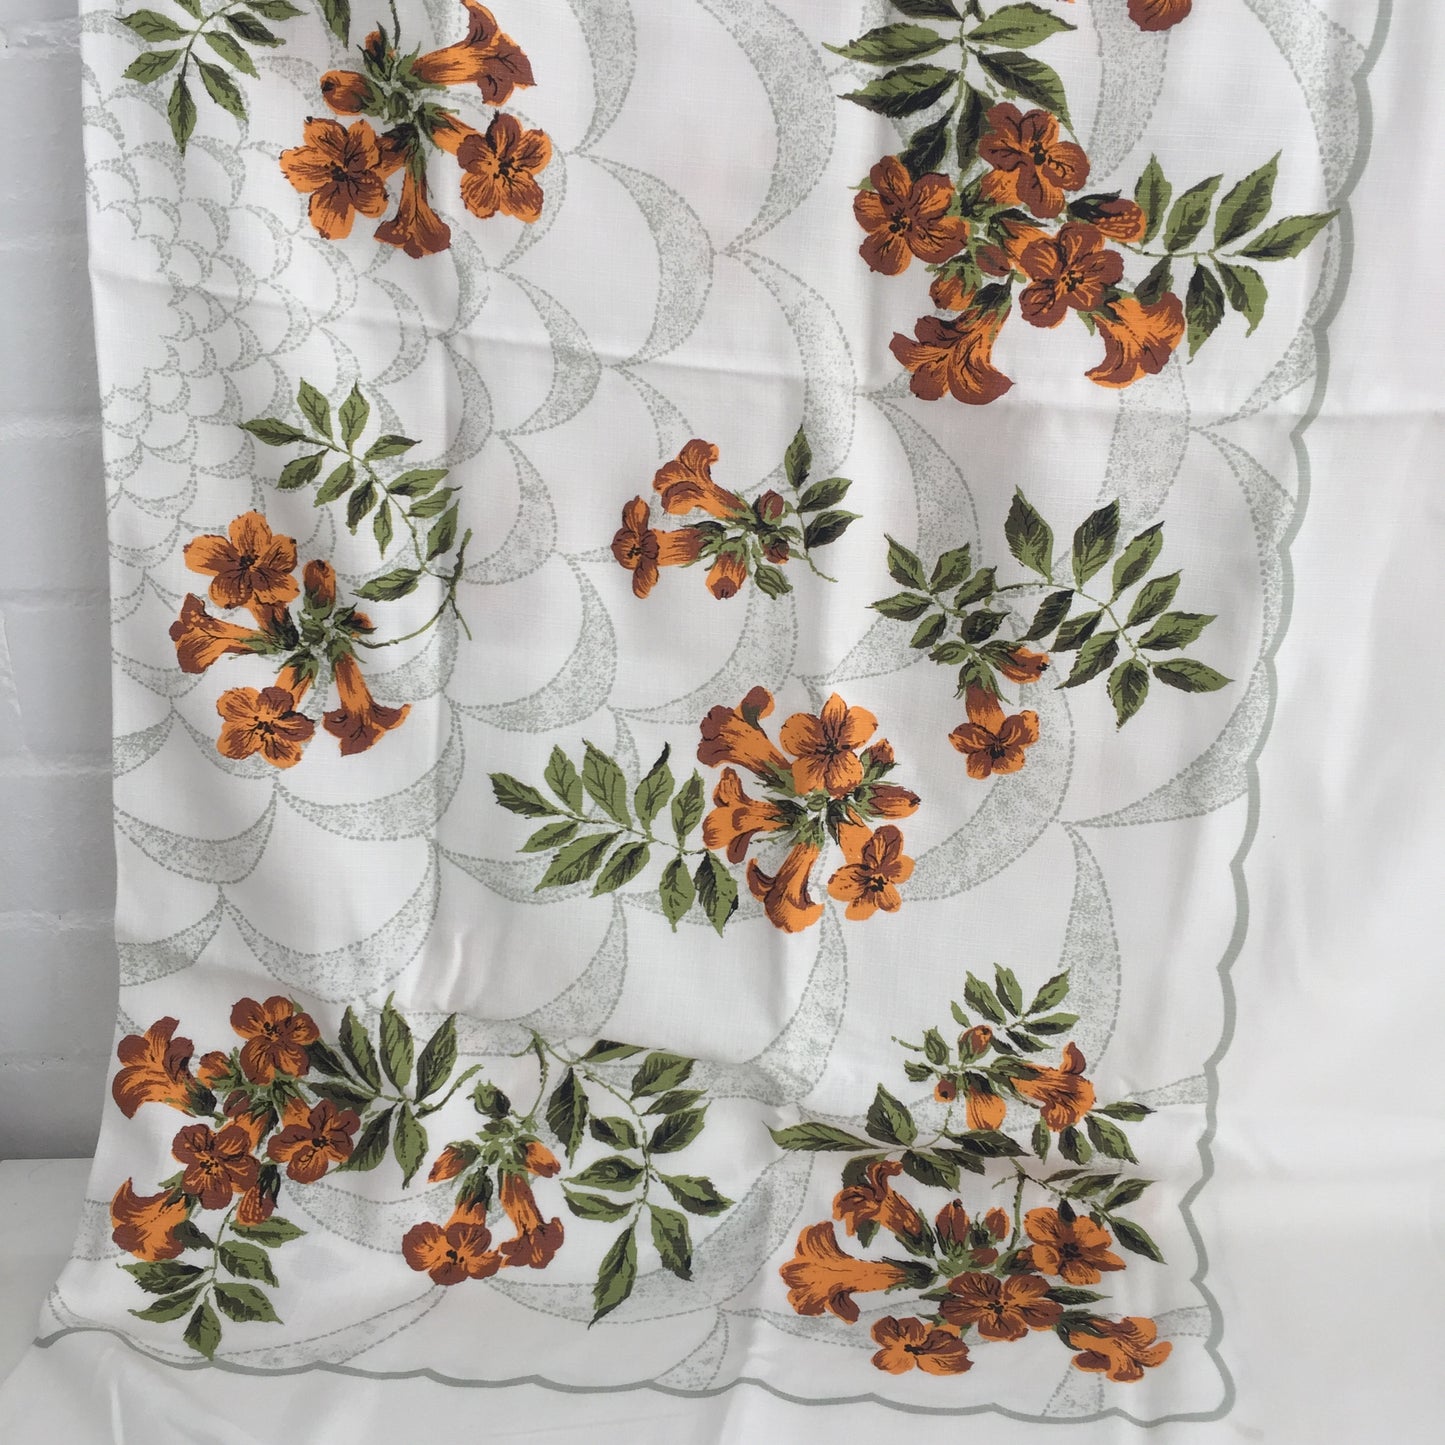 Beautiful Vintage Floral Table Cloth Caravan Camping 50's Table